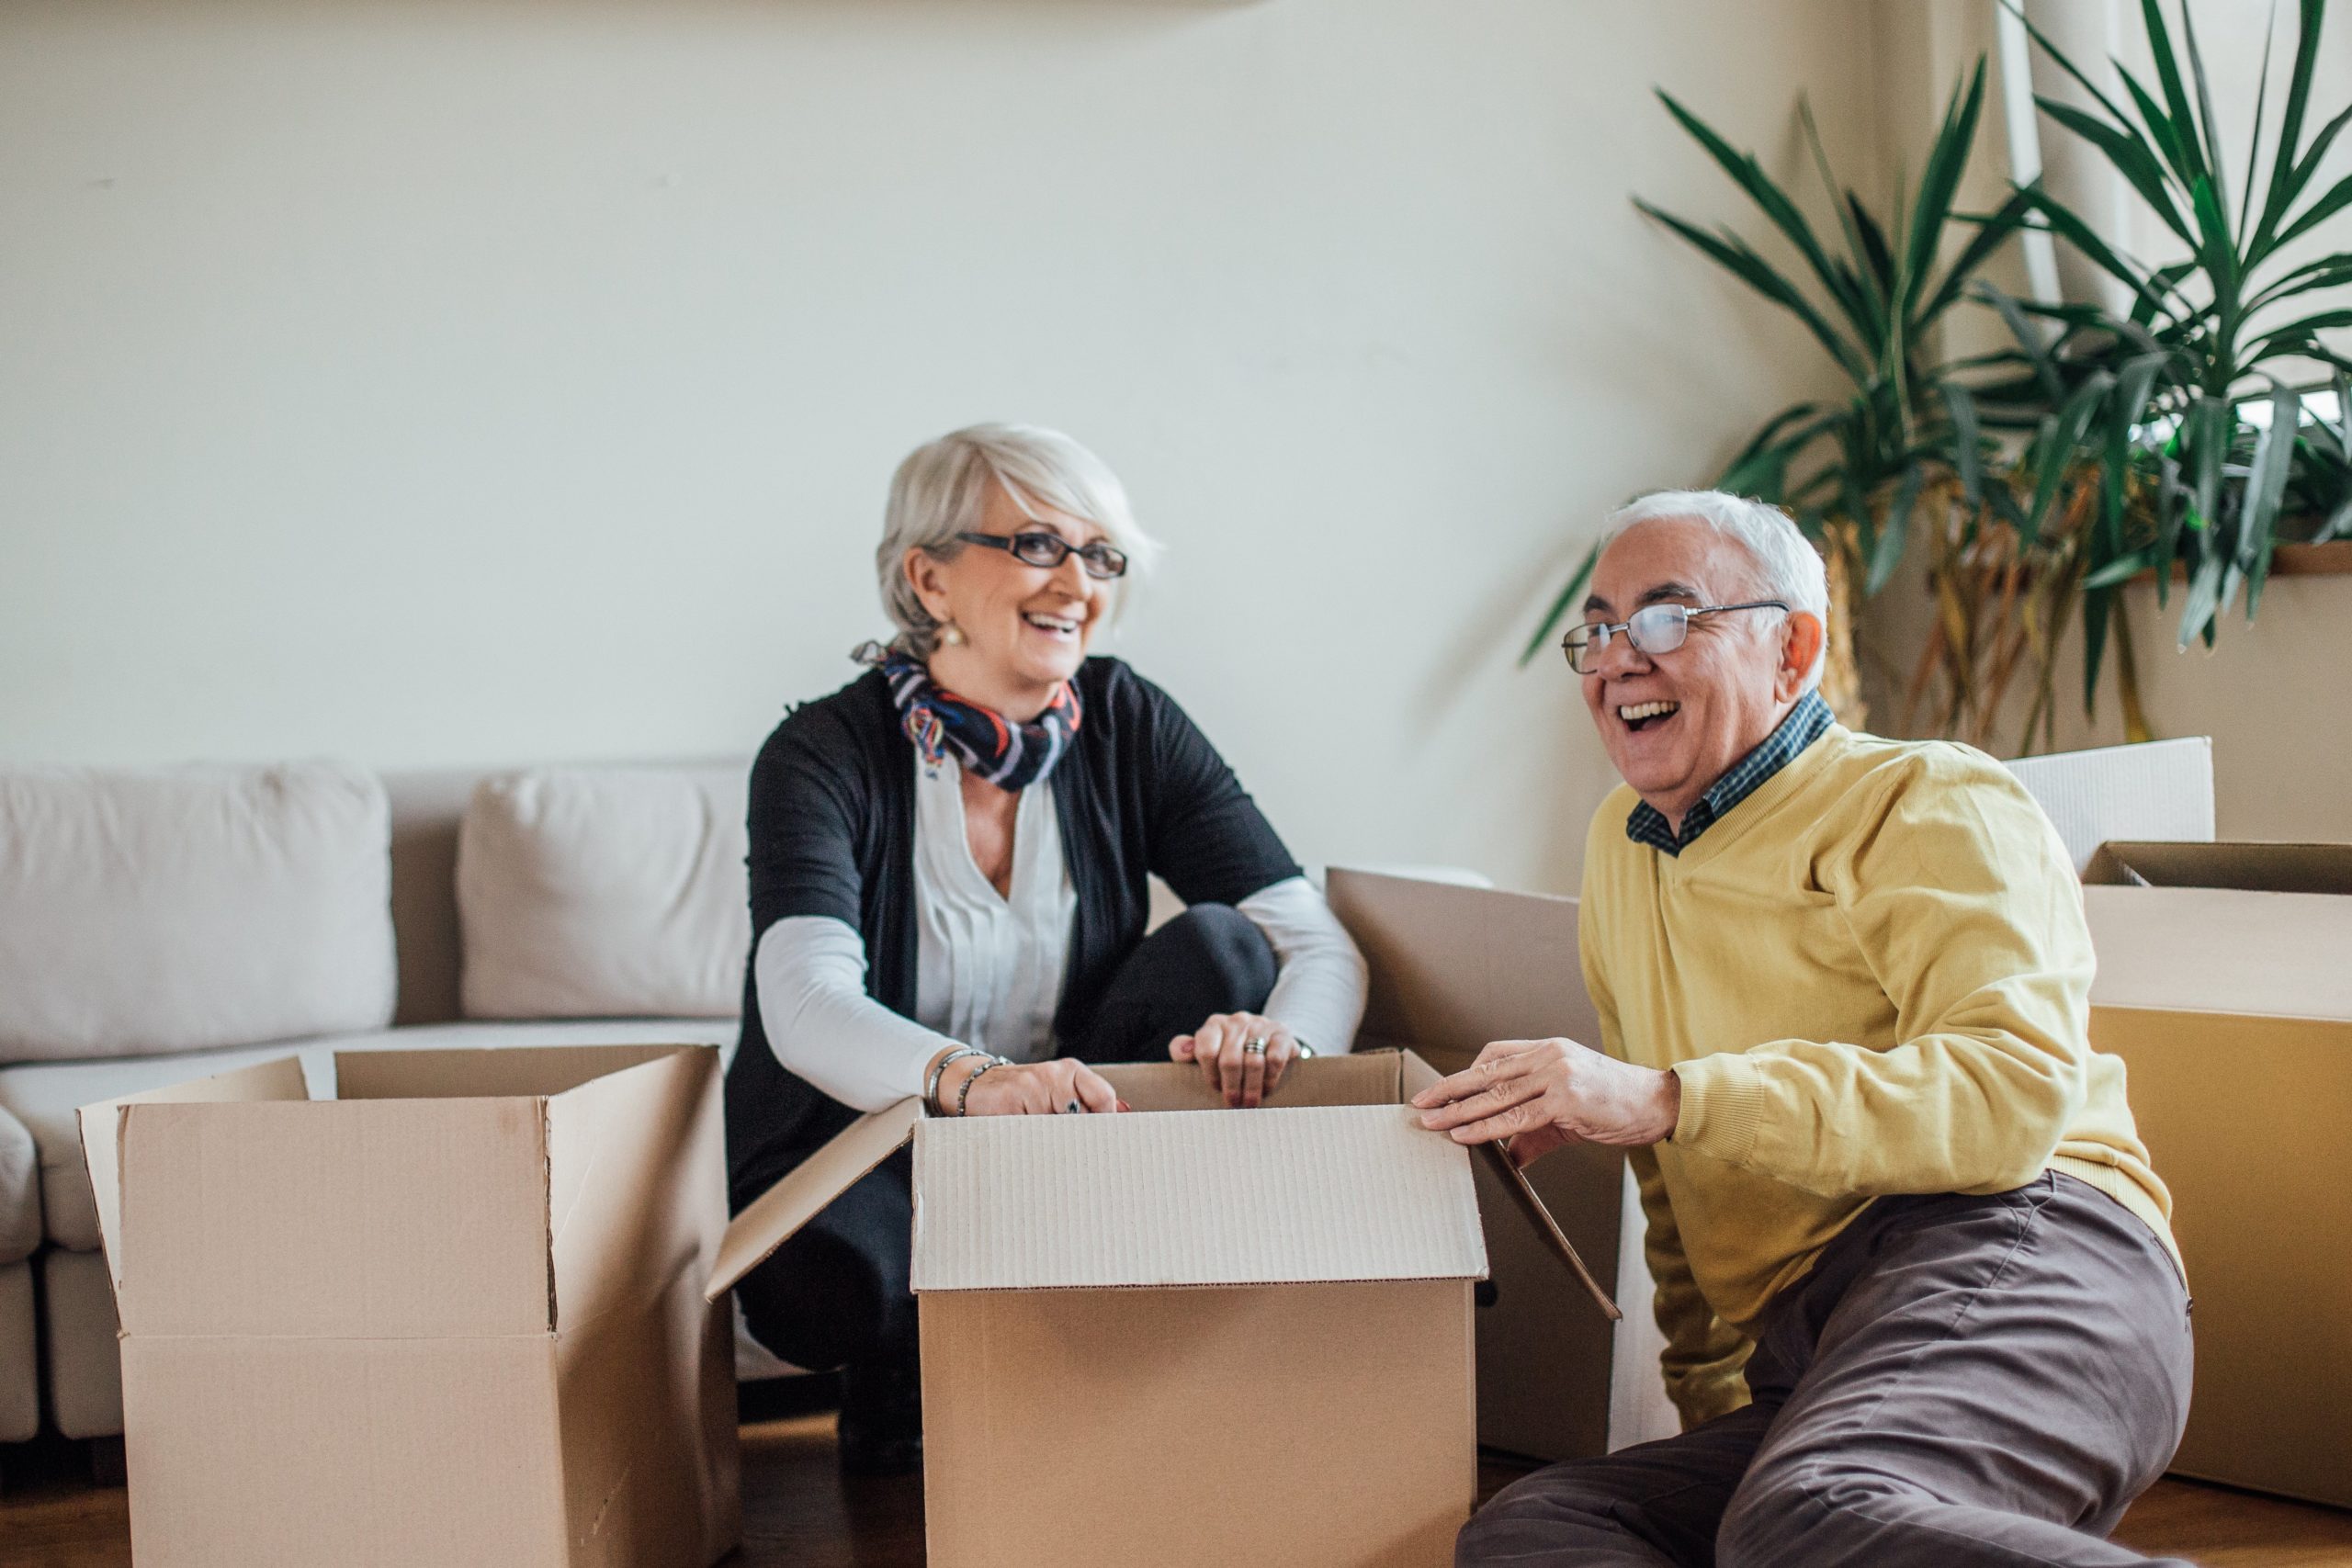 Slideshow: 10 Benefits to Moving into Assisted Living